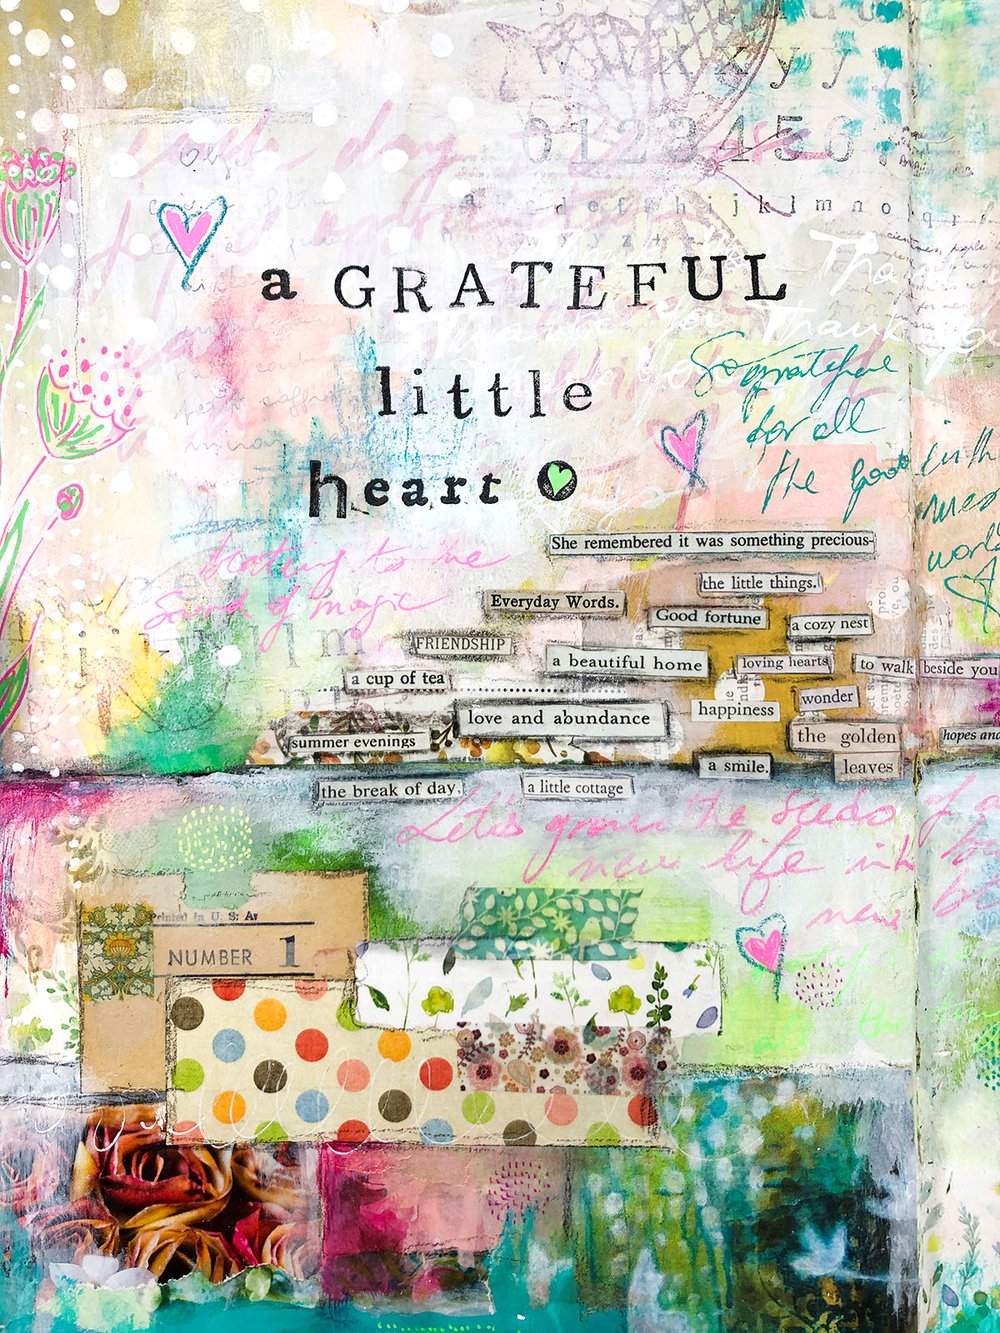 My favorite art supplies — Laly Mille Mixed Media Art